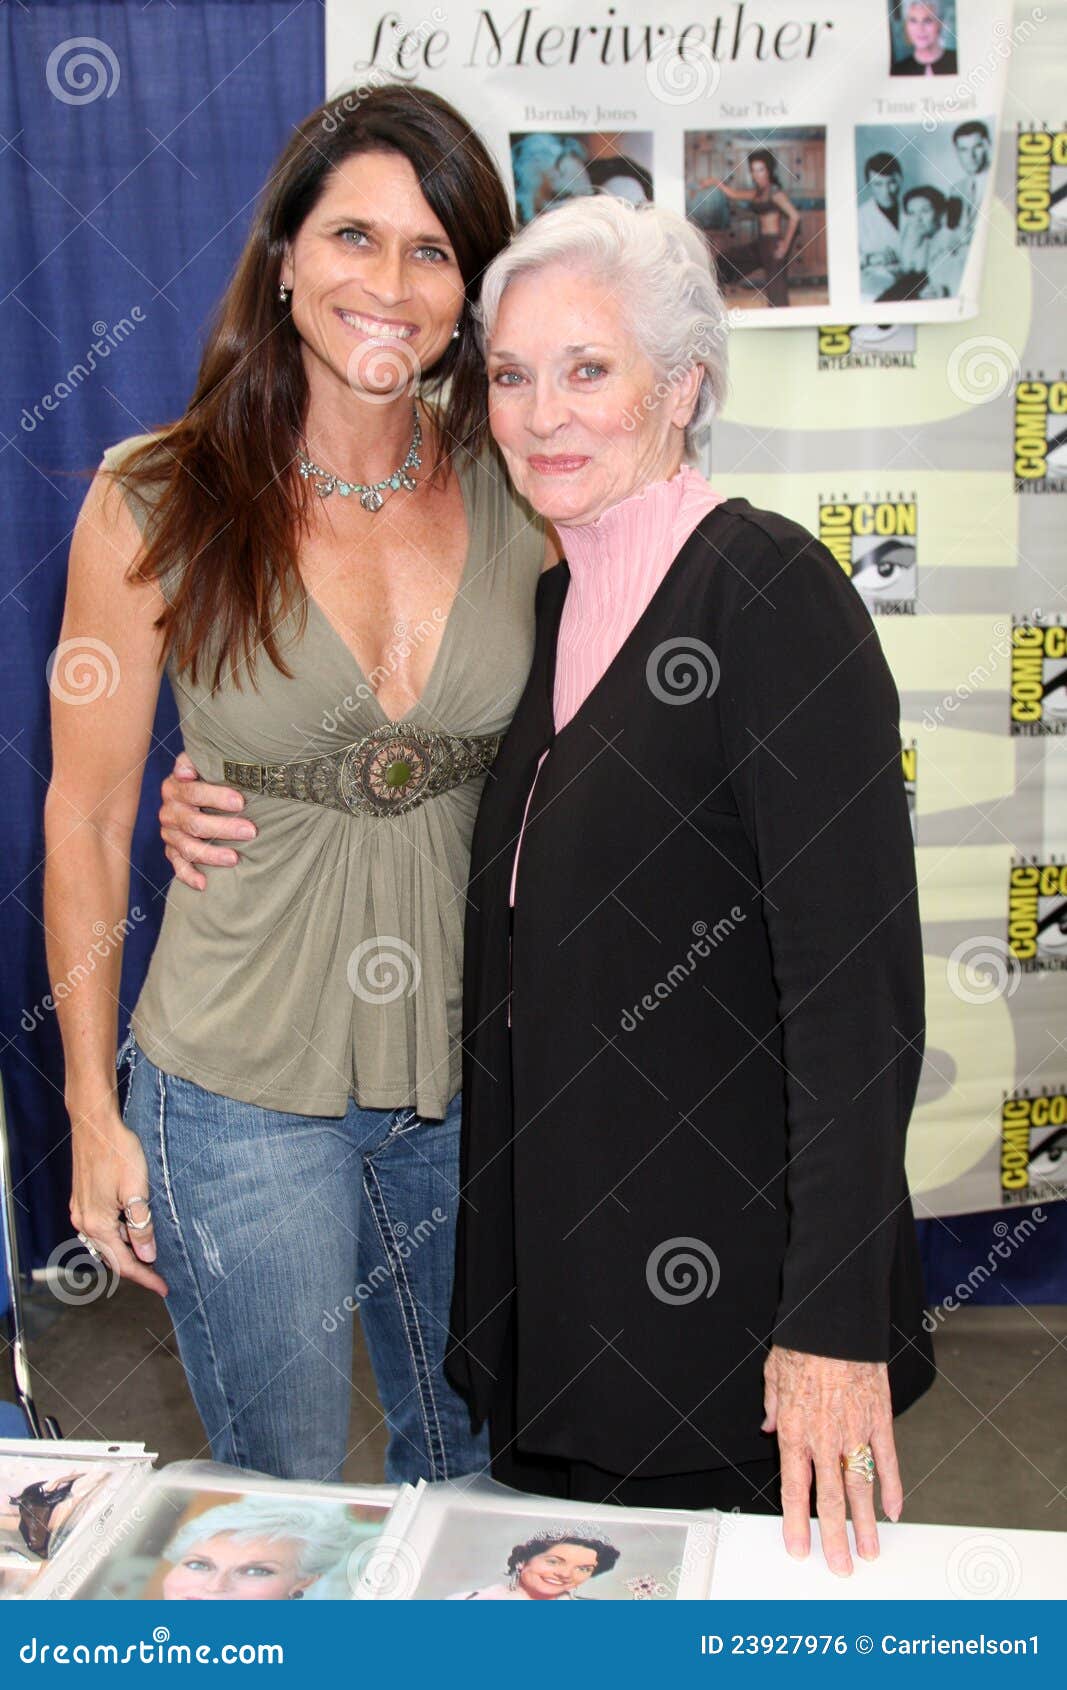 darryl sargeant recommends lee meriwether pics pic